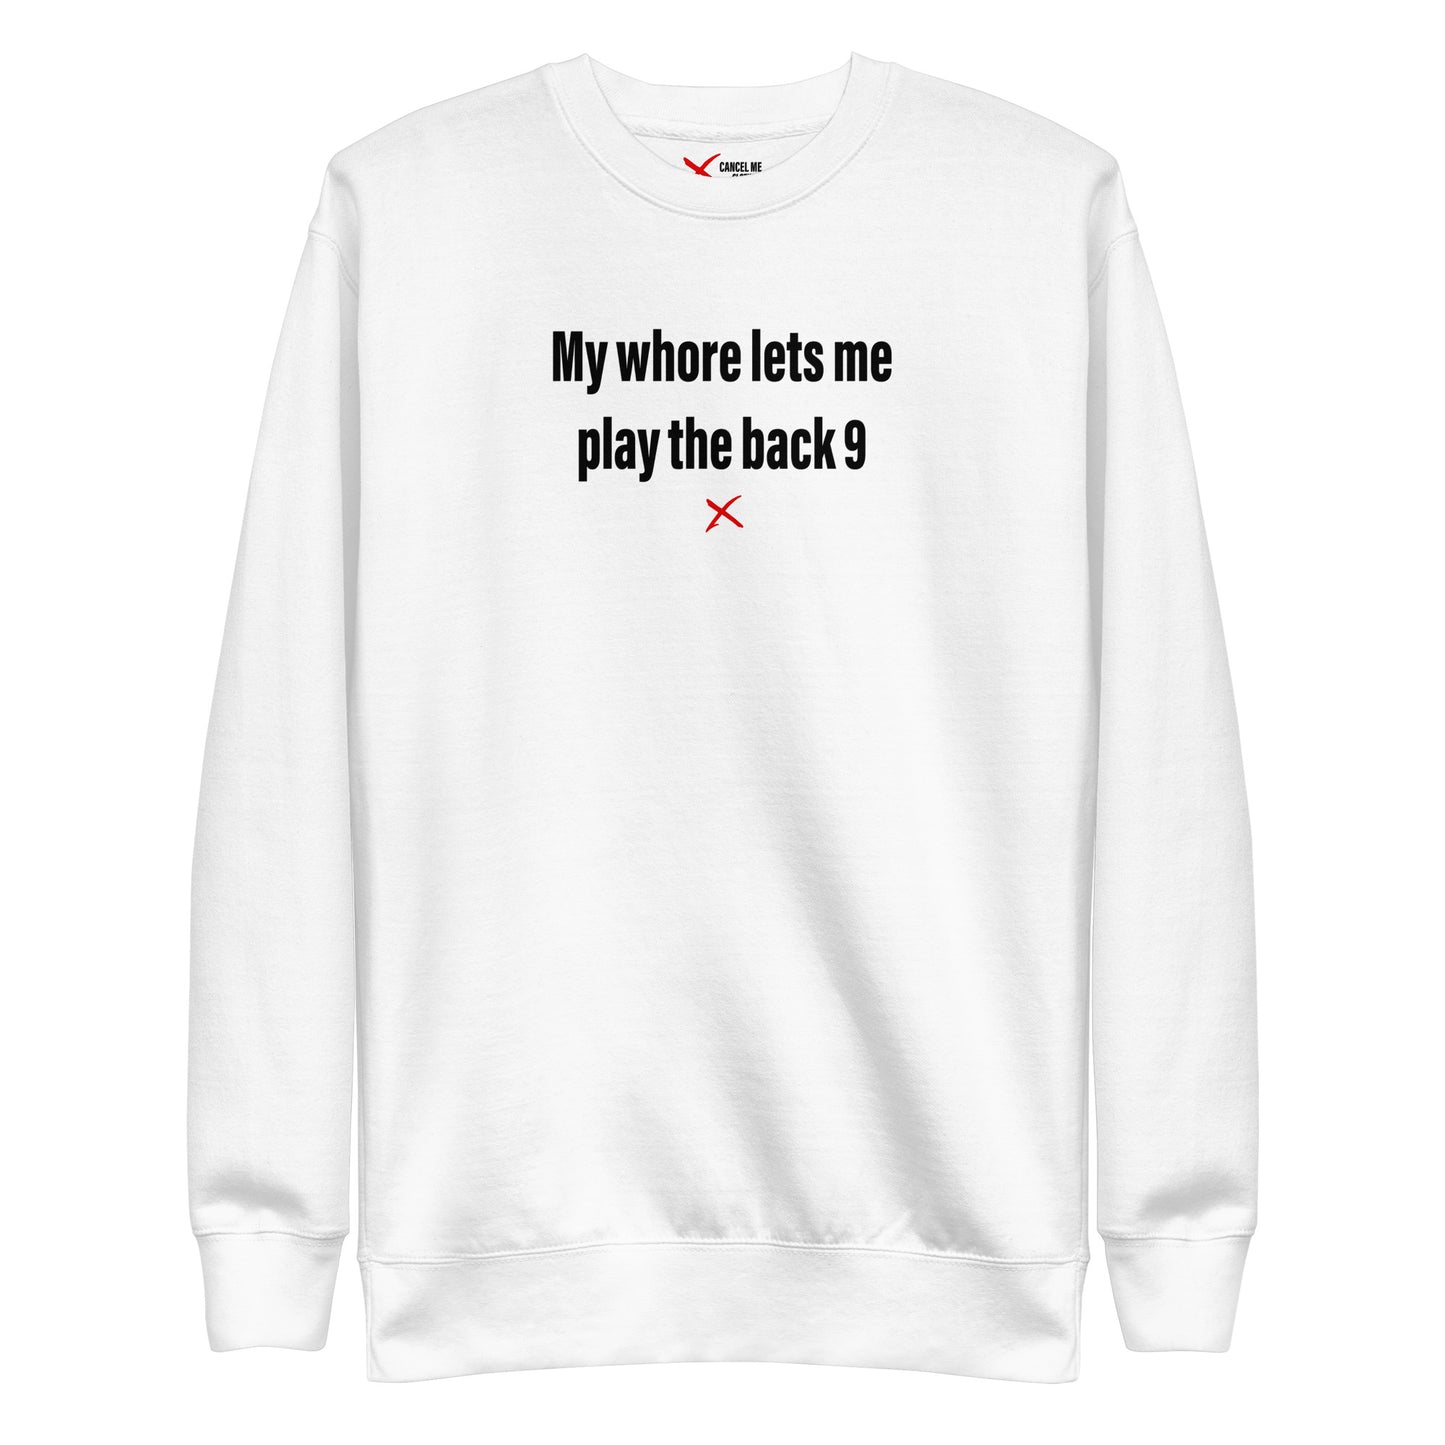 My whore lets me play the back 9 - Sweatshirt